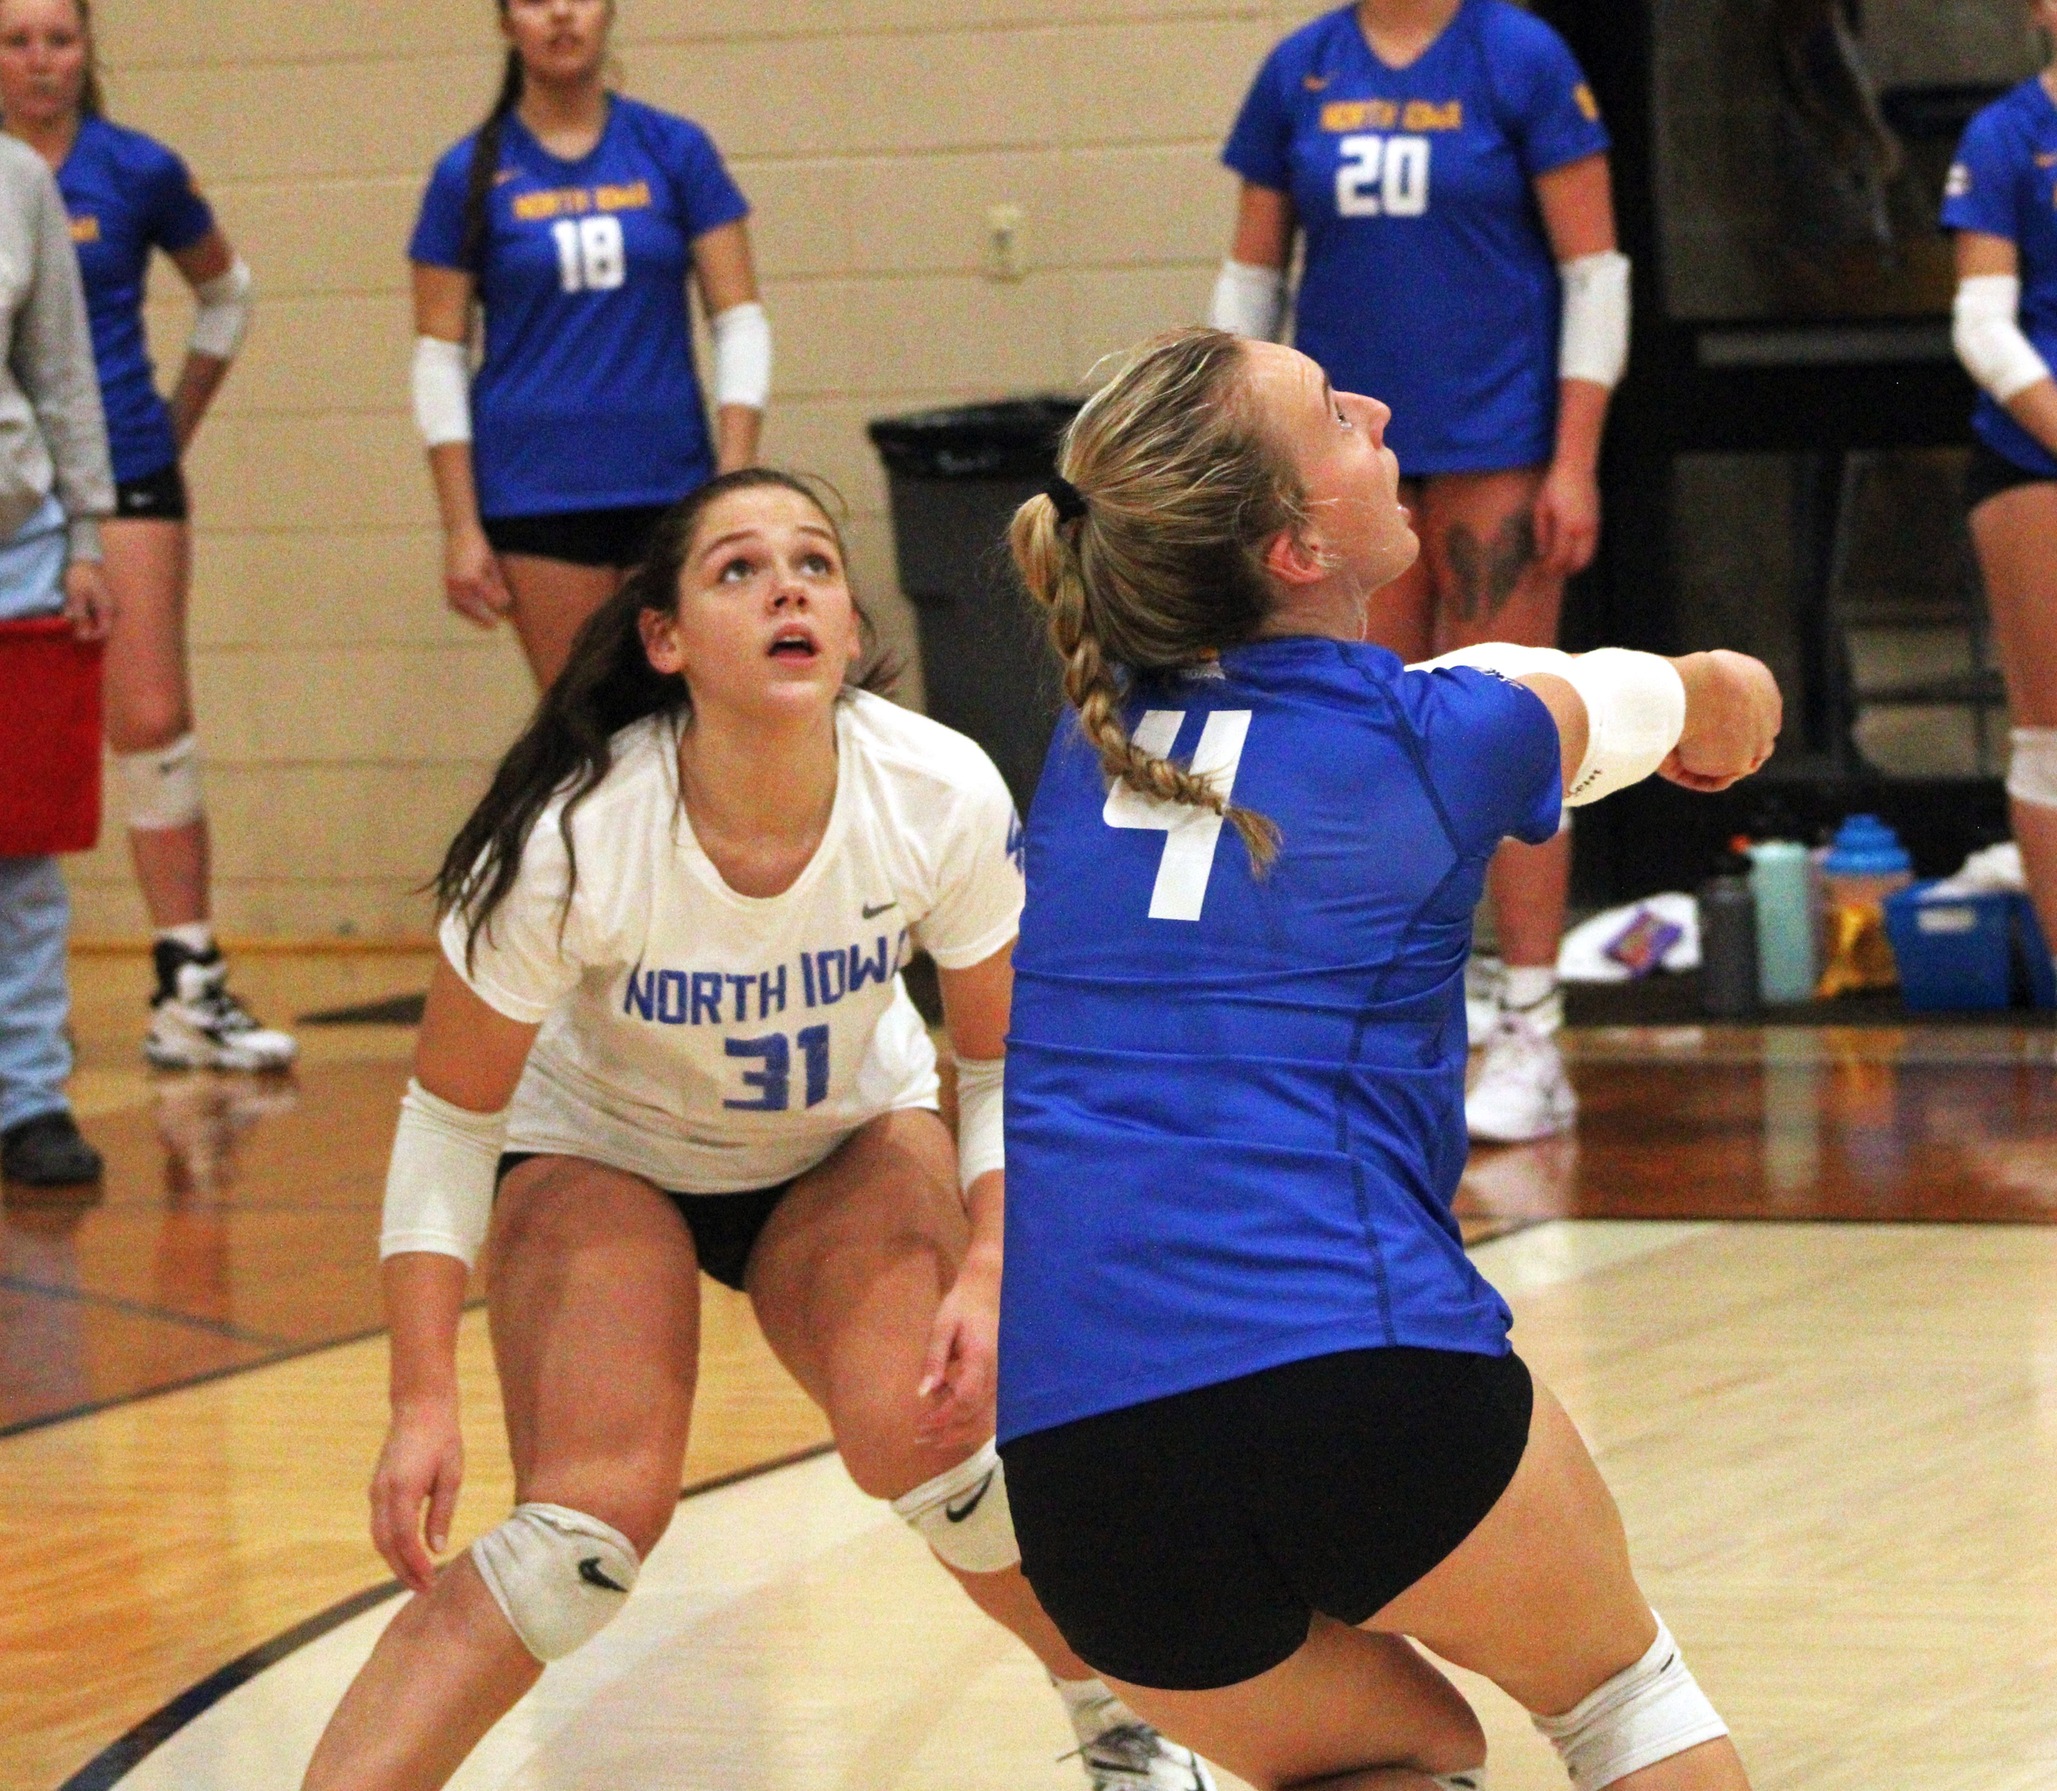 NIACC's Kennedy Schwiesow returns the ball during Friday's match against Iowa Lakes in the NIACC gym.